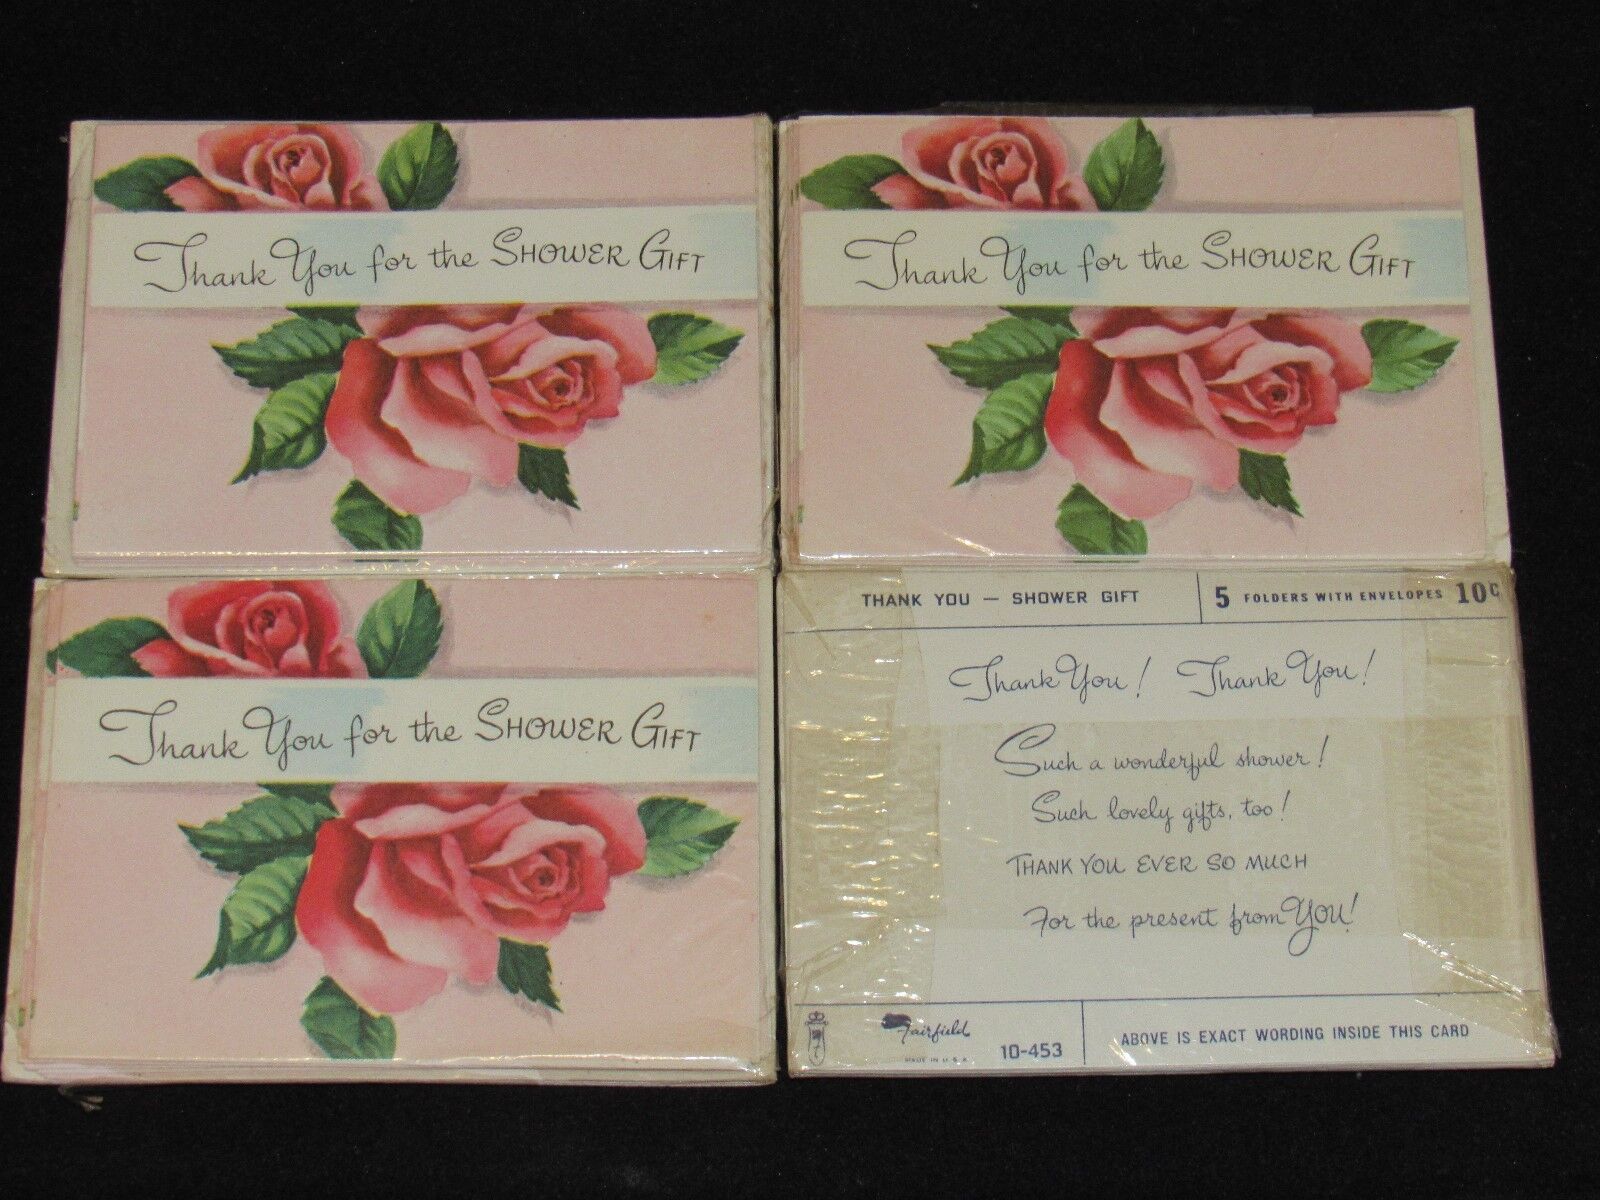 ~20 Vintage Fairfield Thank You Shower Gift Cards Shabby Chic Roses Flowers~